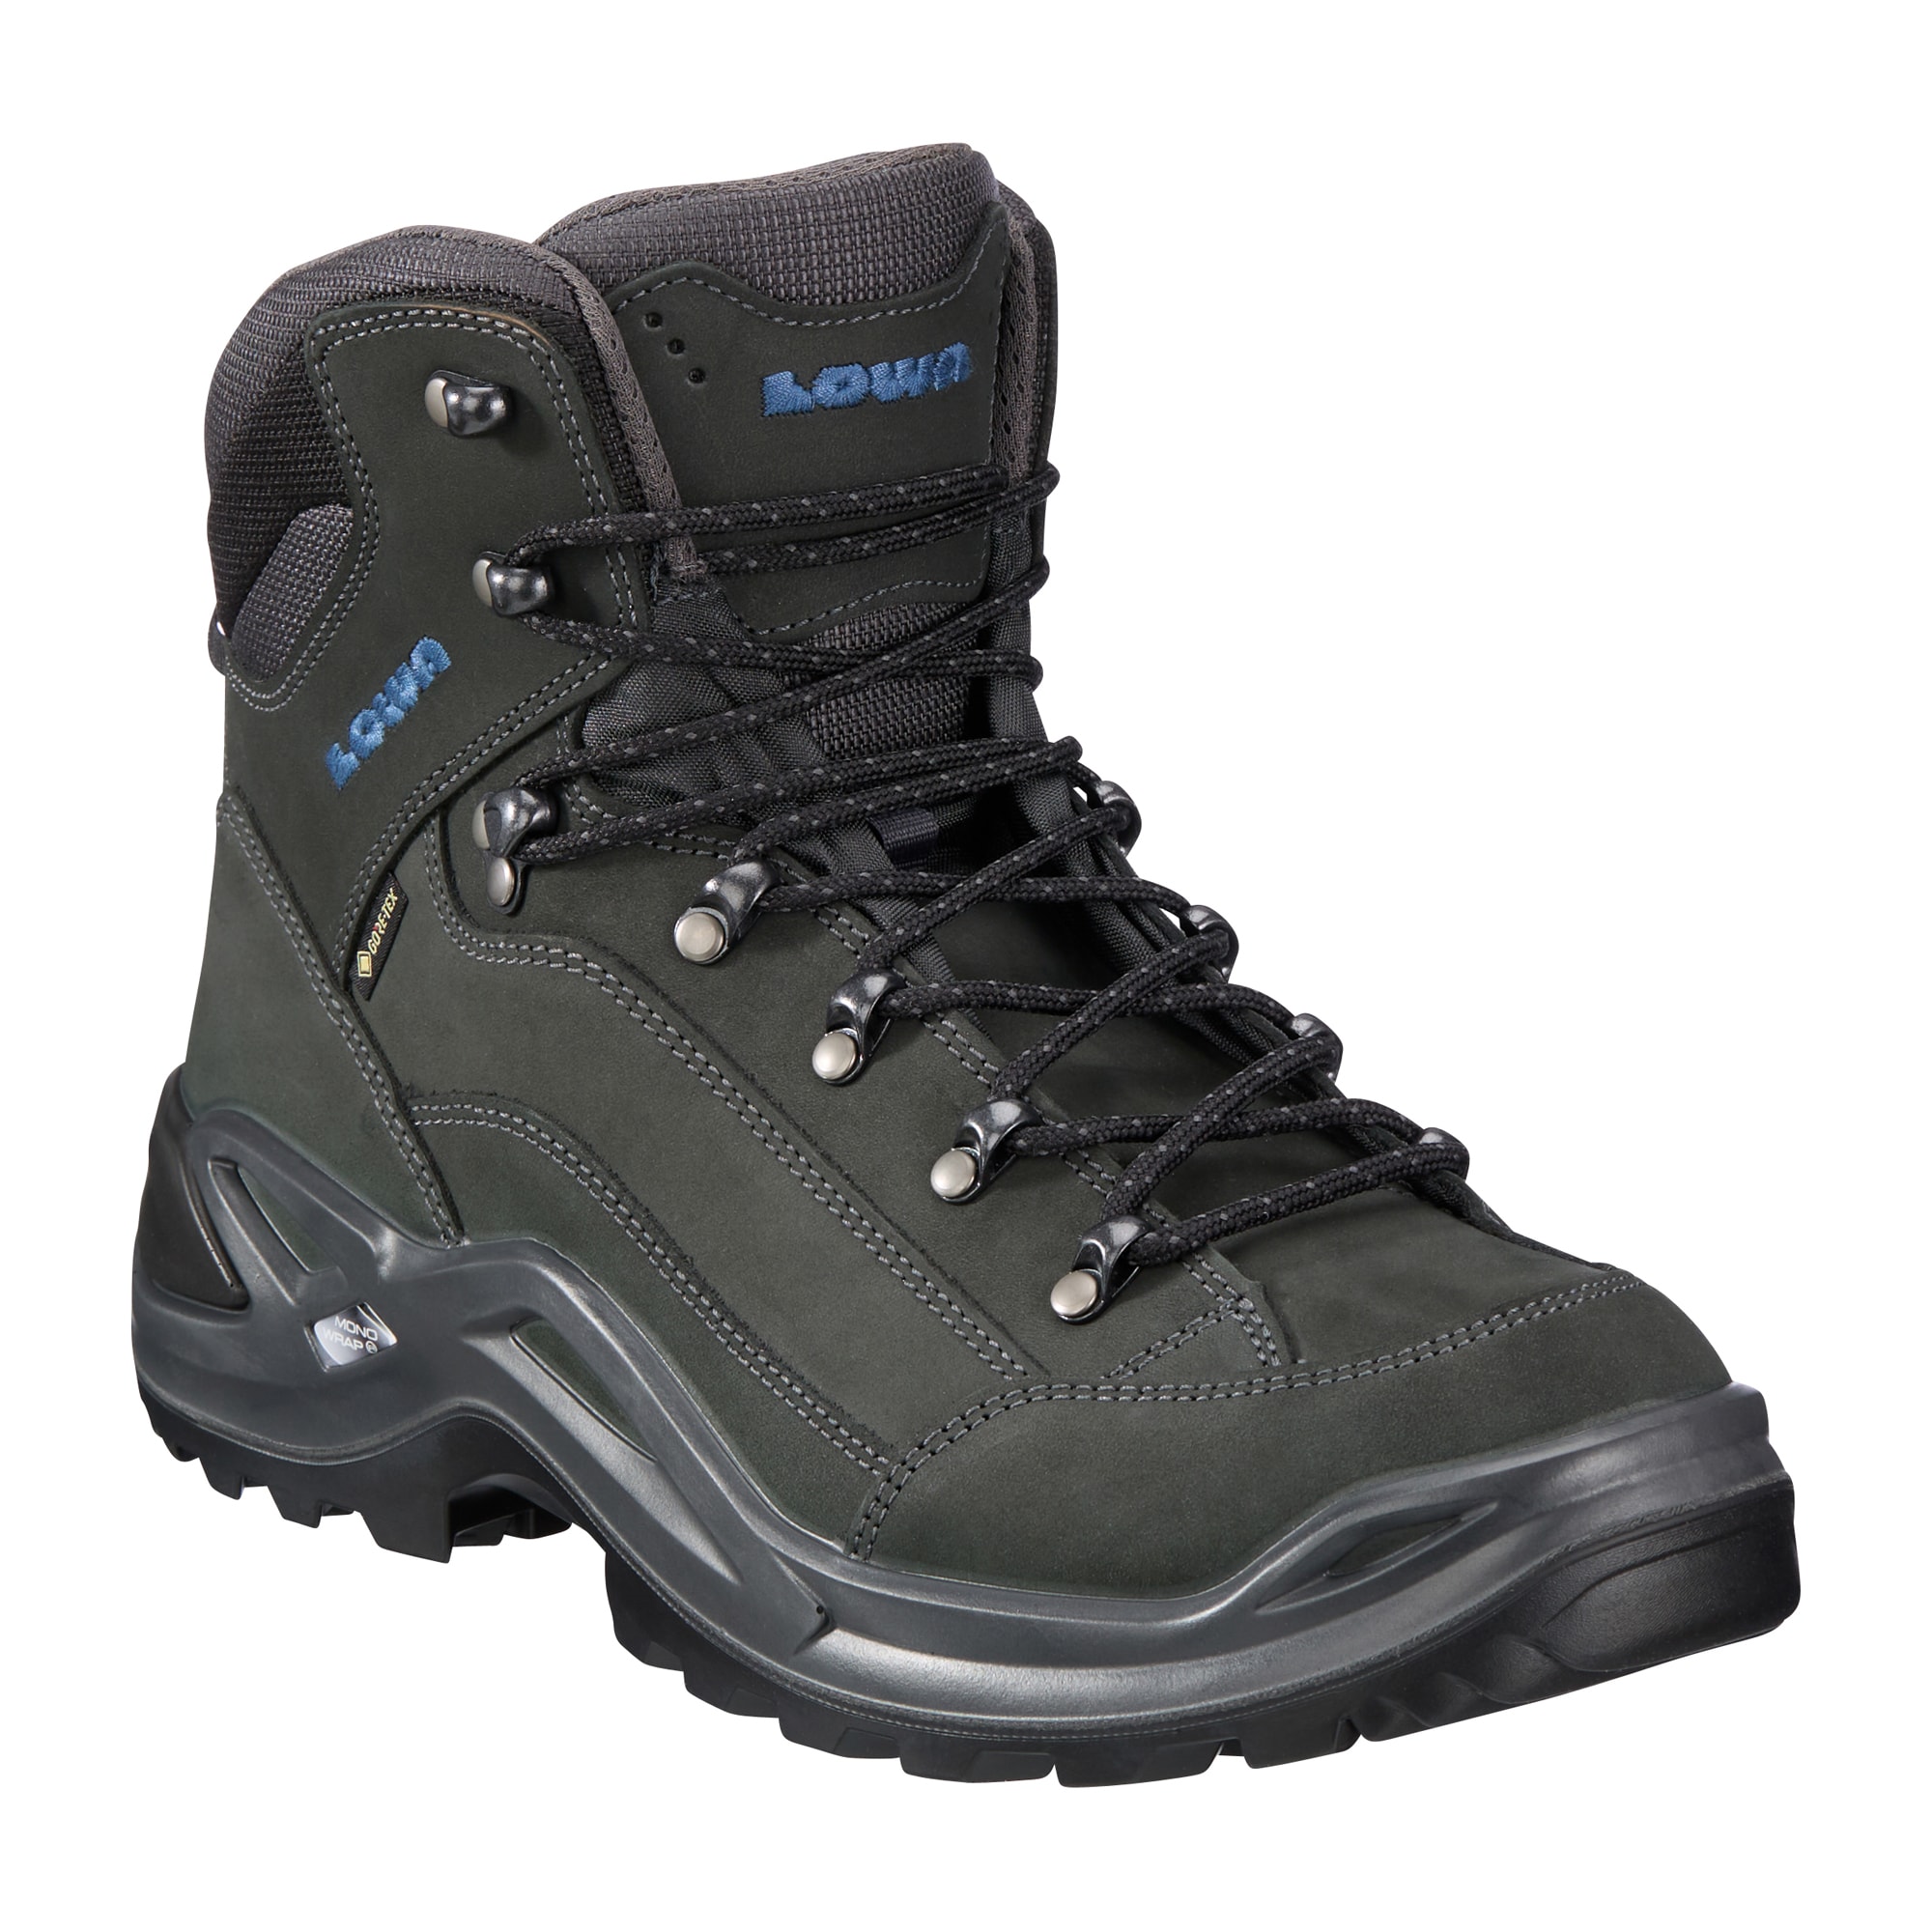 Verdrag Let op Stout Purchase the LOWA Boots Renegade GTX Mid anthracite steel blue b